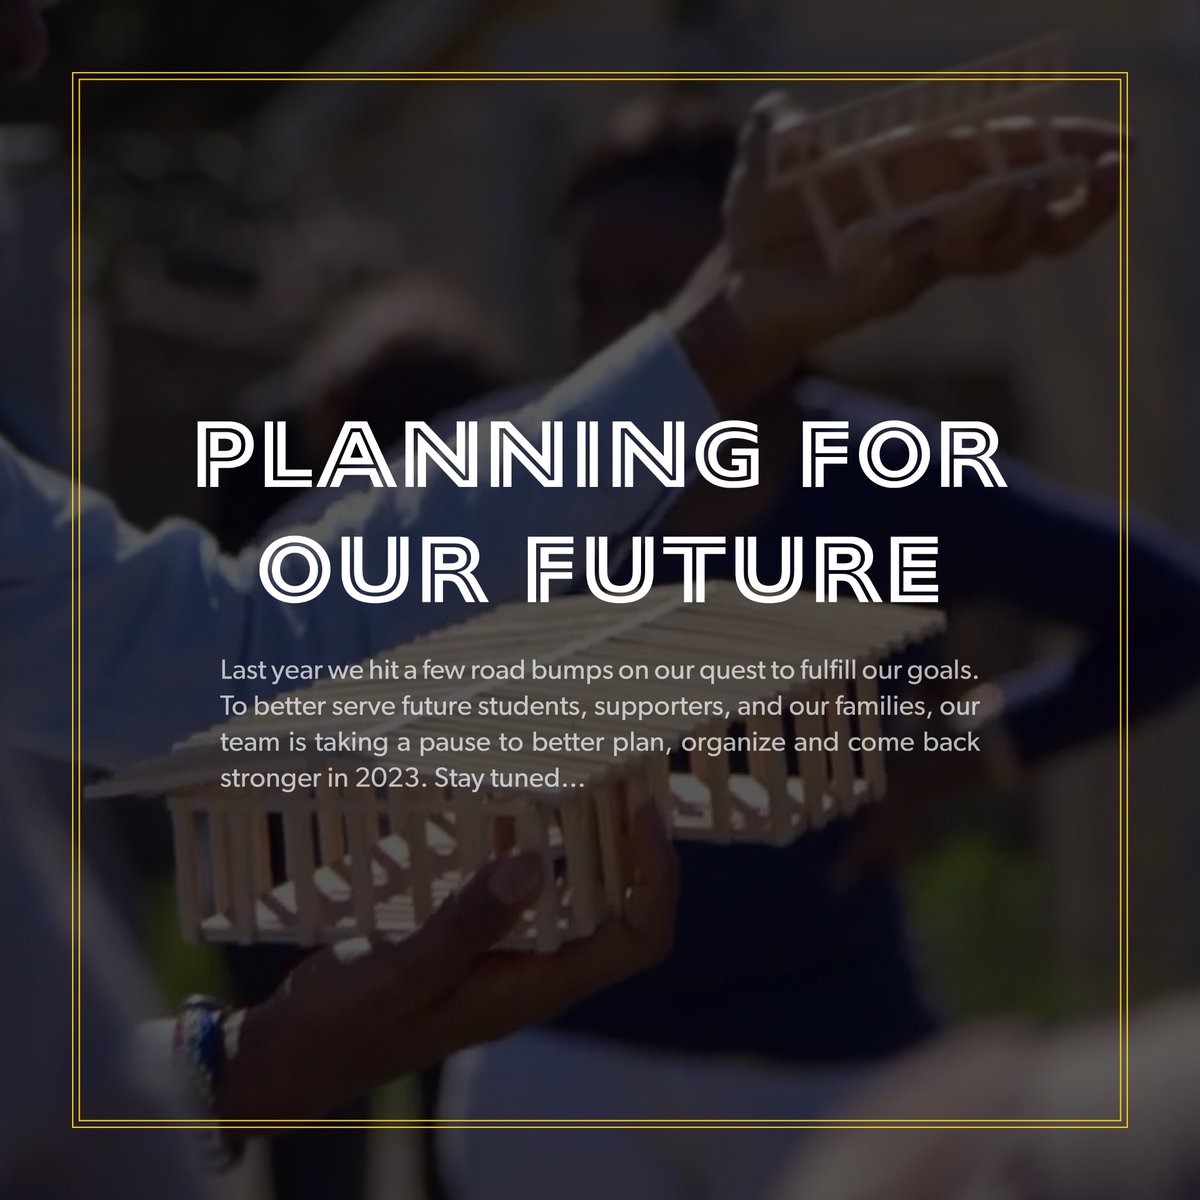 Last year we hit a few road bumps on our quest to fulfill our goals. To better serve future students, supporters, and our families, our team is taking a pause to better plan, organize and come back stronger in 2023. Stay tuned... = #UbuntuASAP #ourfuture #better #faster #stronger